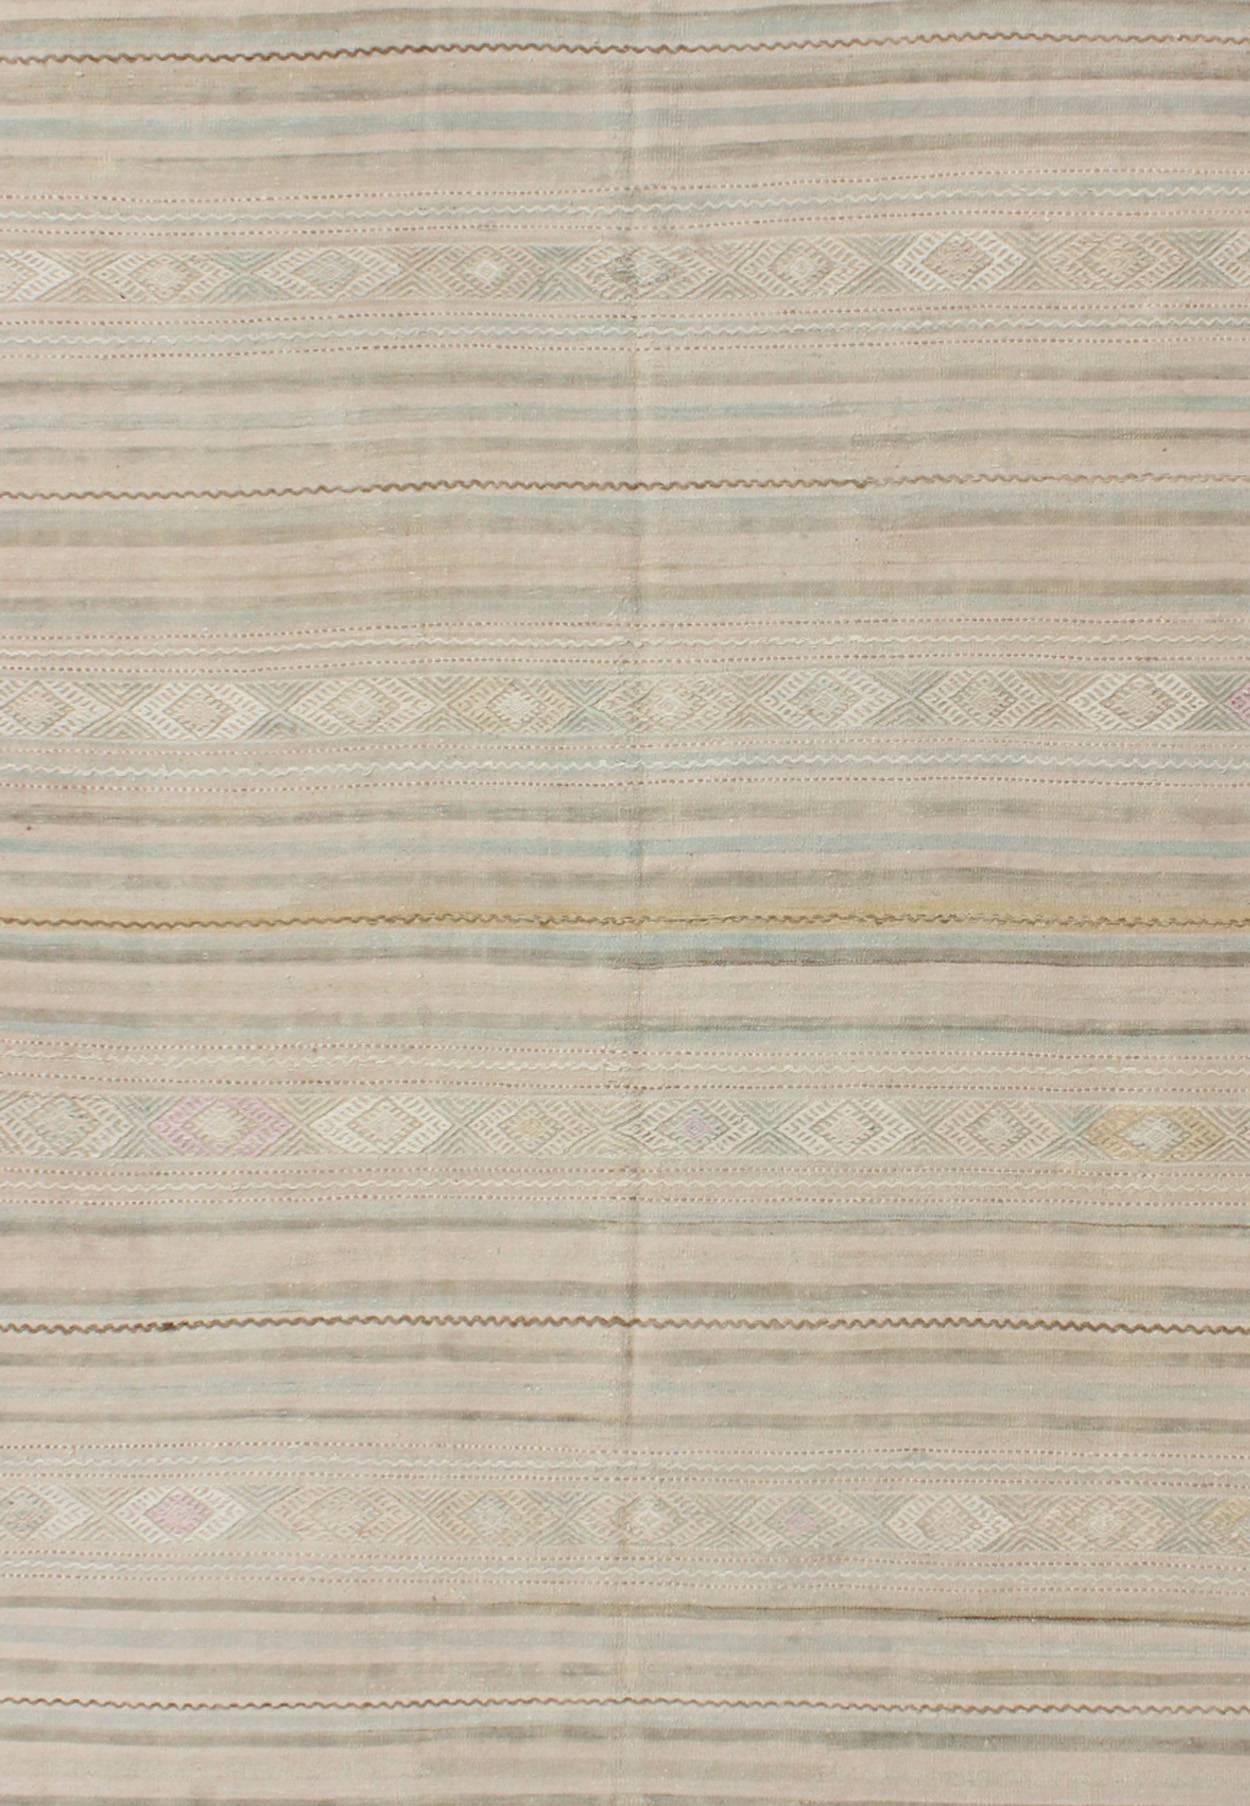 Hand-Woven Vintage Turkish Kilim Rug with Neutral Horizontal Stripes and Geometric Designs For Sale